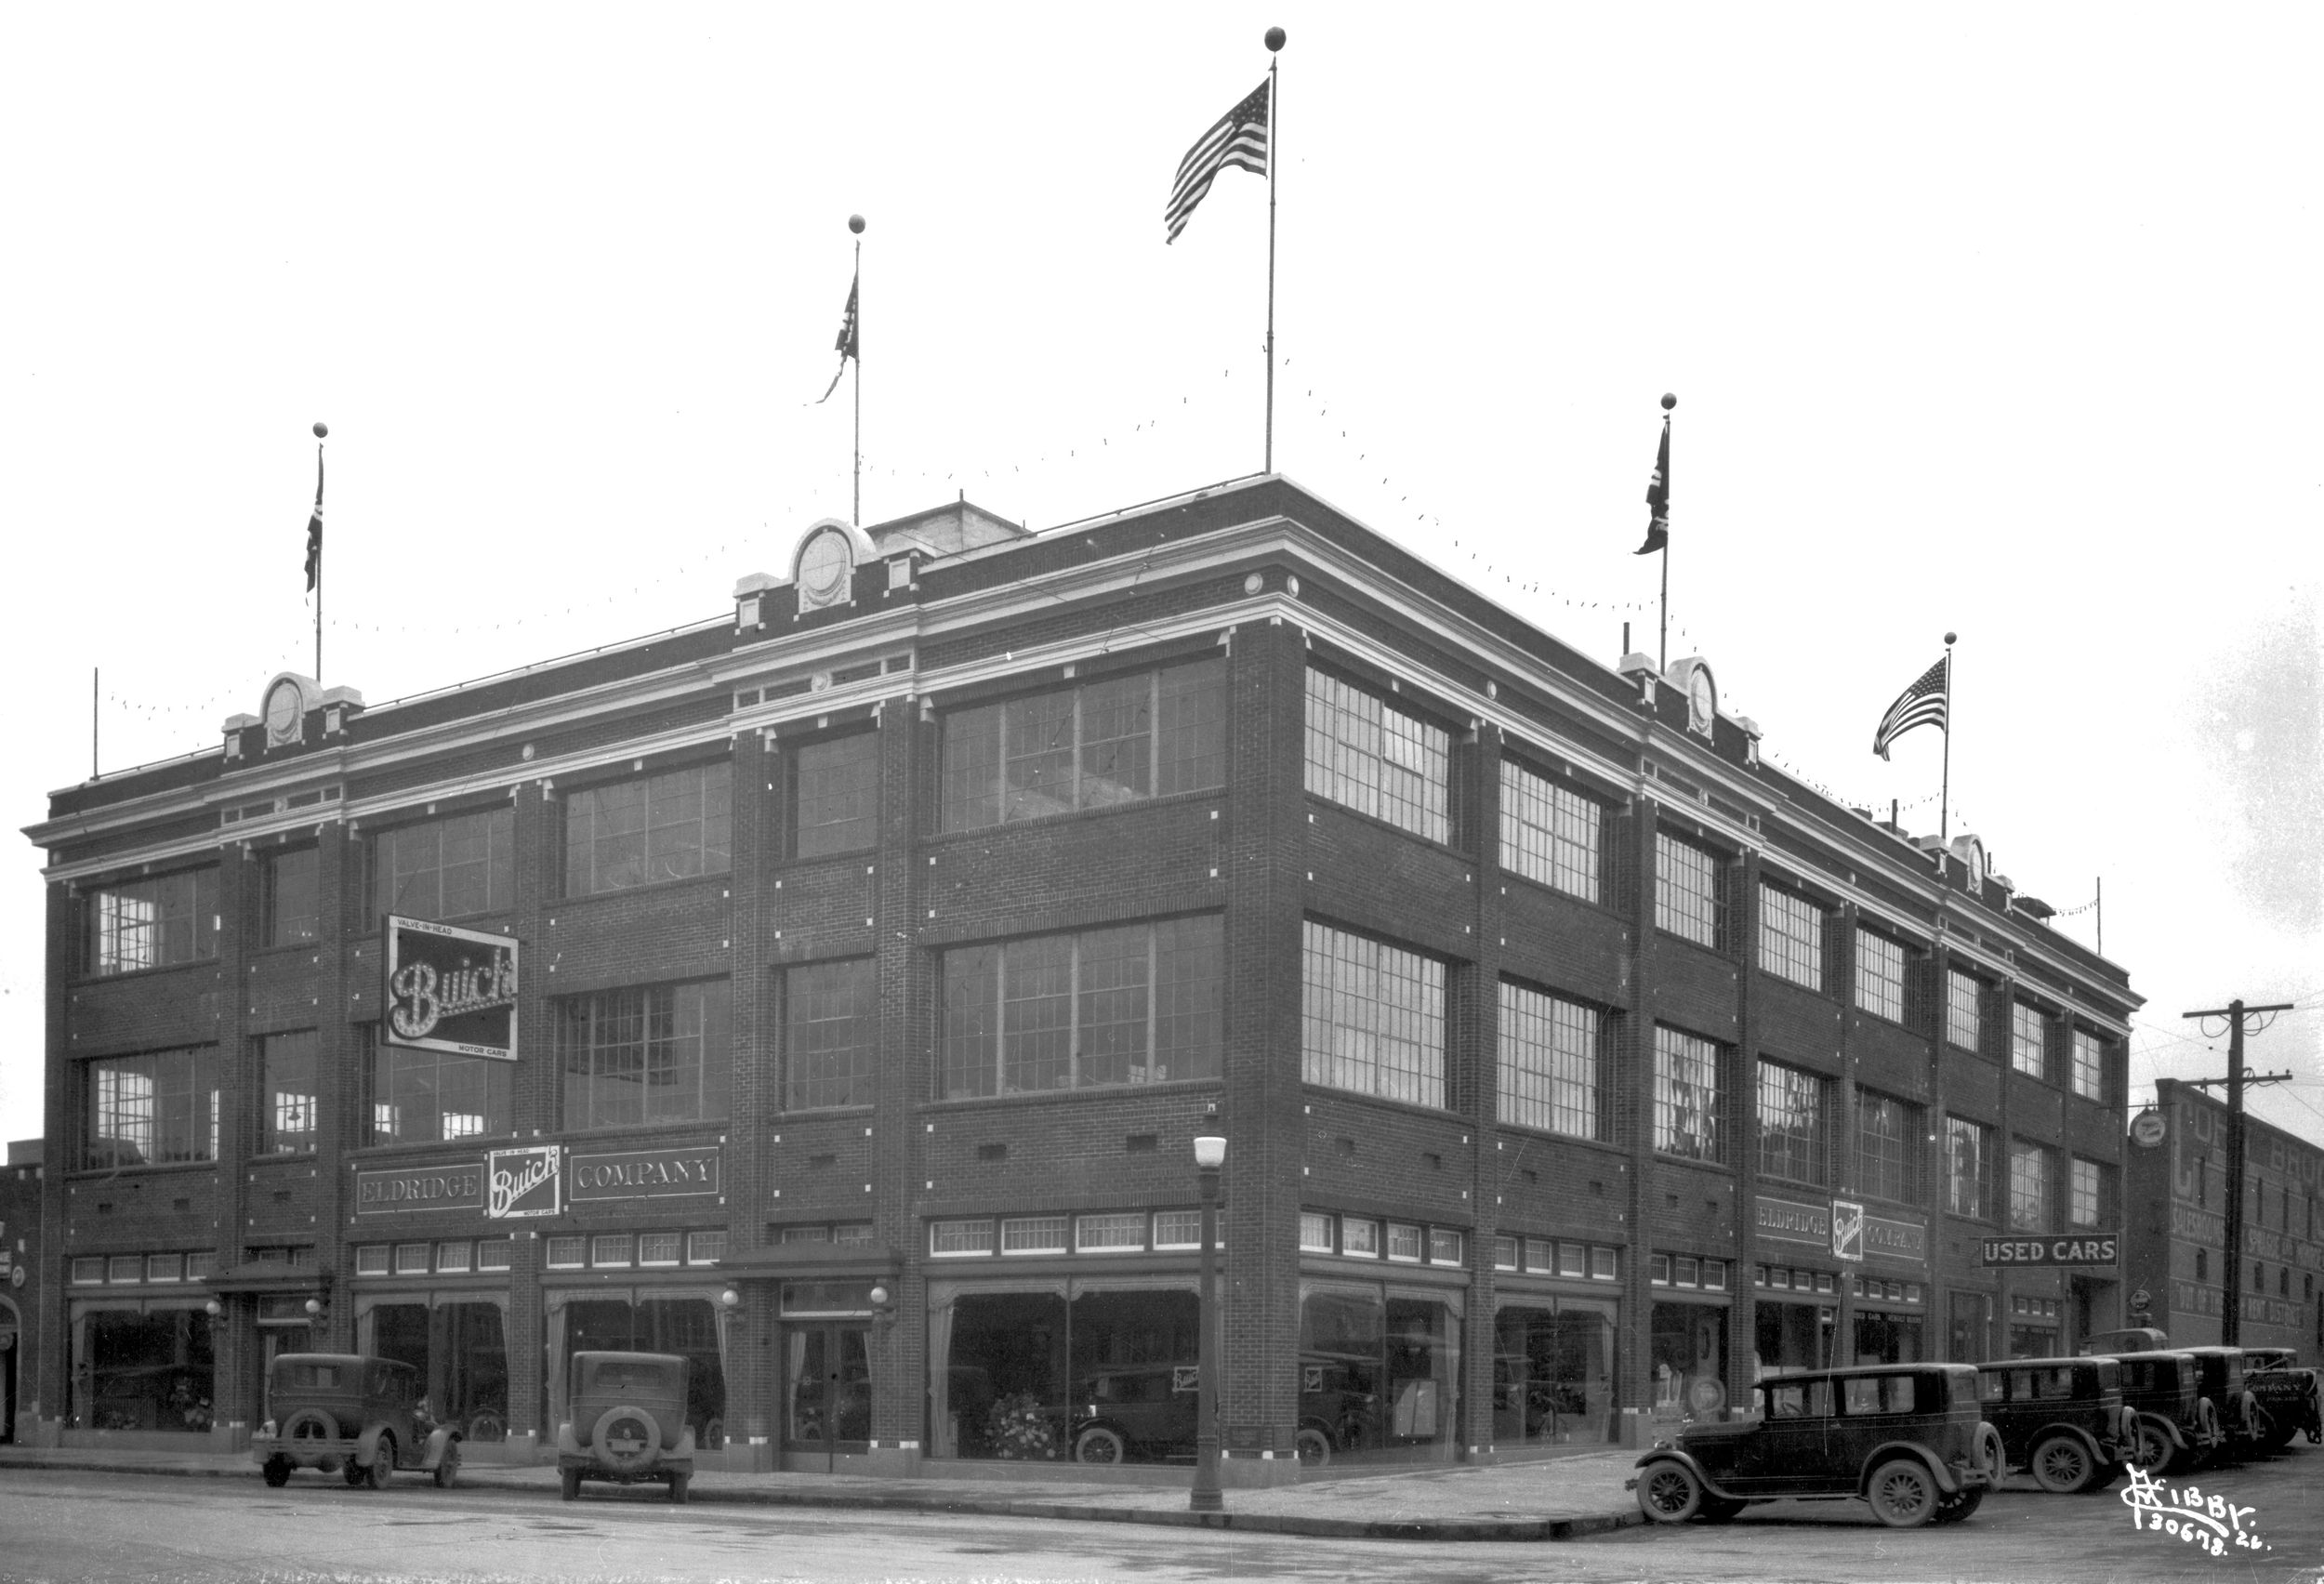 1926: The Eldridge Building, built for the Eldridge Buick Co., sits on the southeast corner of First Avenue and Cedar Street on the west end of downtown Spokane. The three-story building had an elevator to raise autos to any level of the building, including the roof. The architecture is typical of early automotive manufacturing, sales and service centers from that era. (The Eastern / The Spokesman-Review)